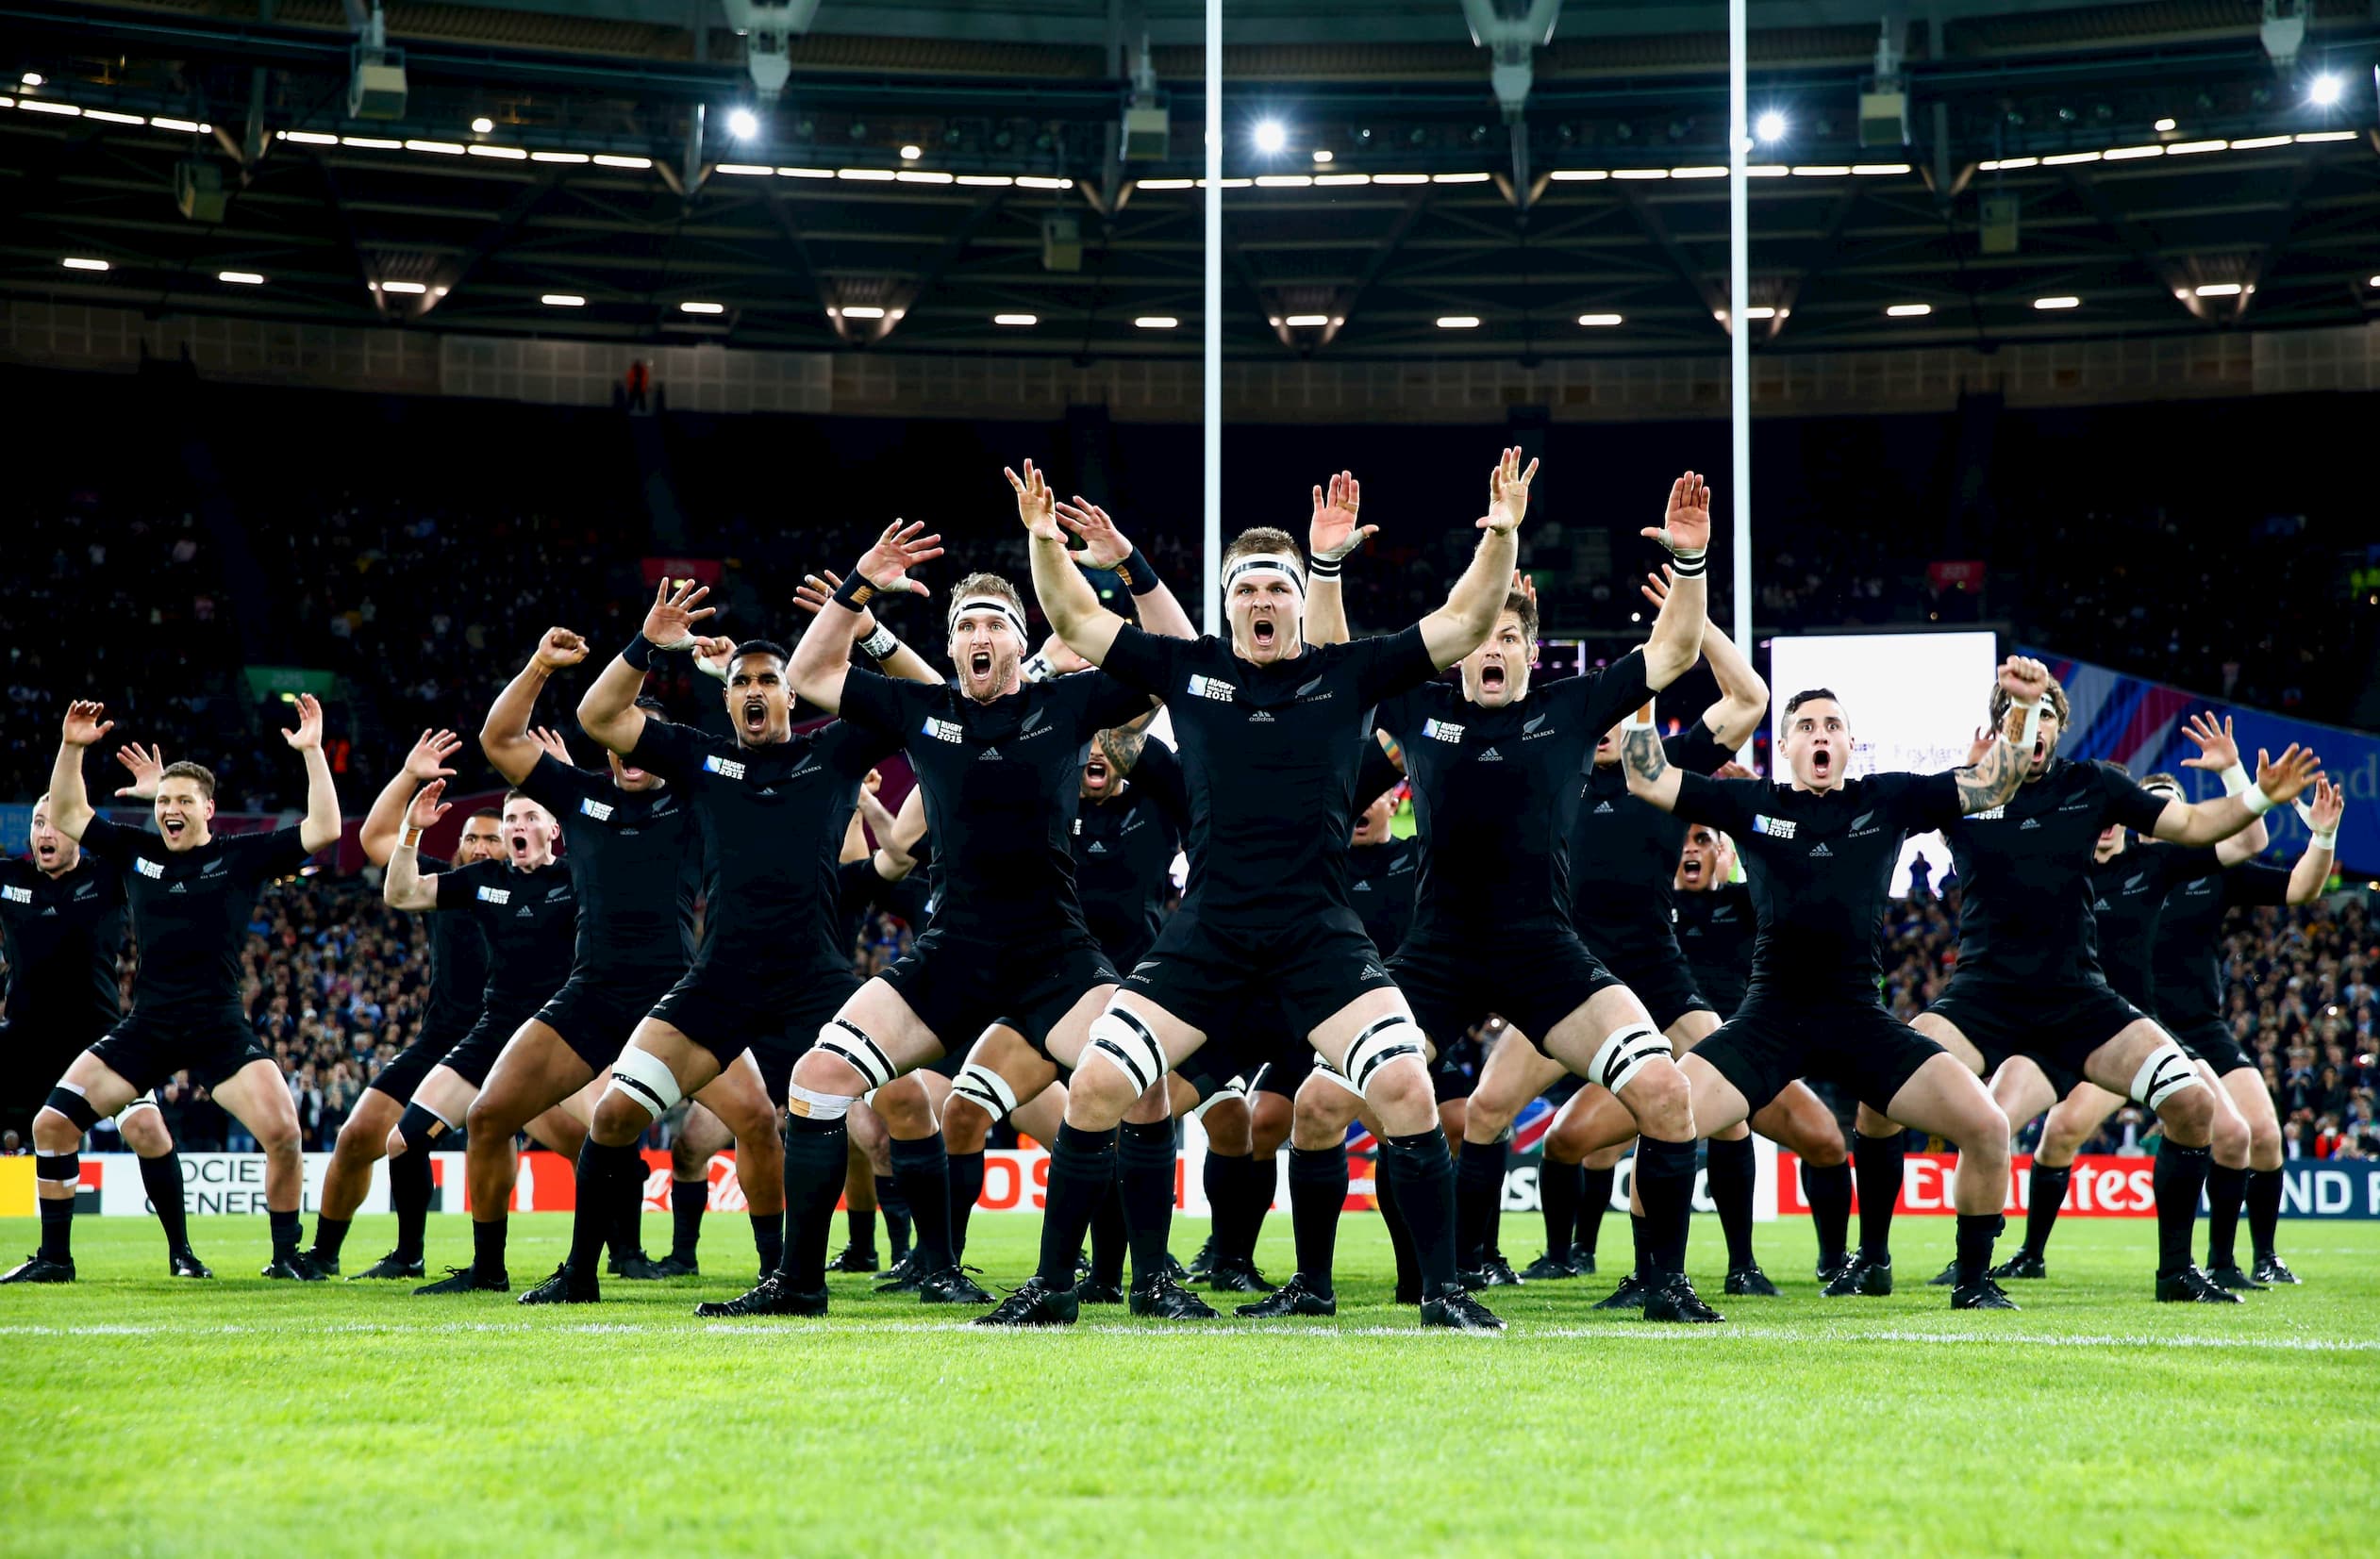 Stun Levering Tragisch Learn About the NZ Rugby Haka - All Blacks Experience